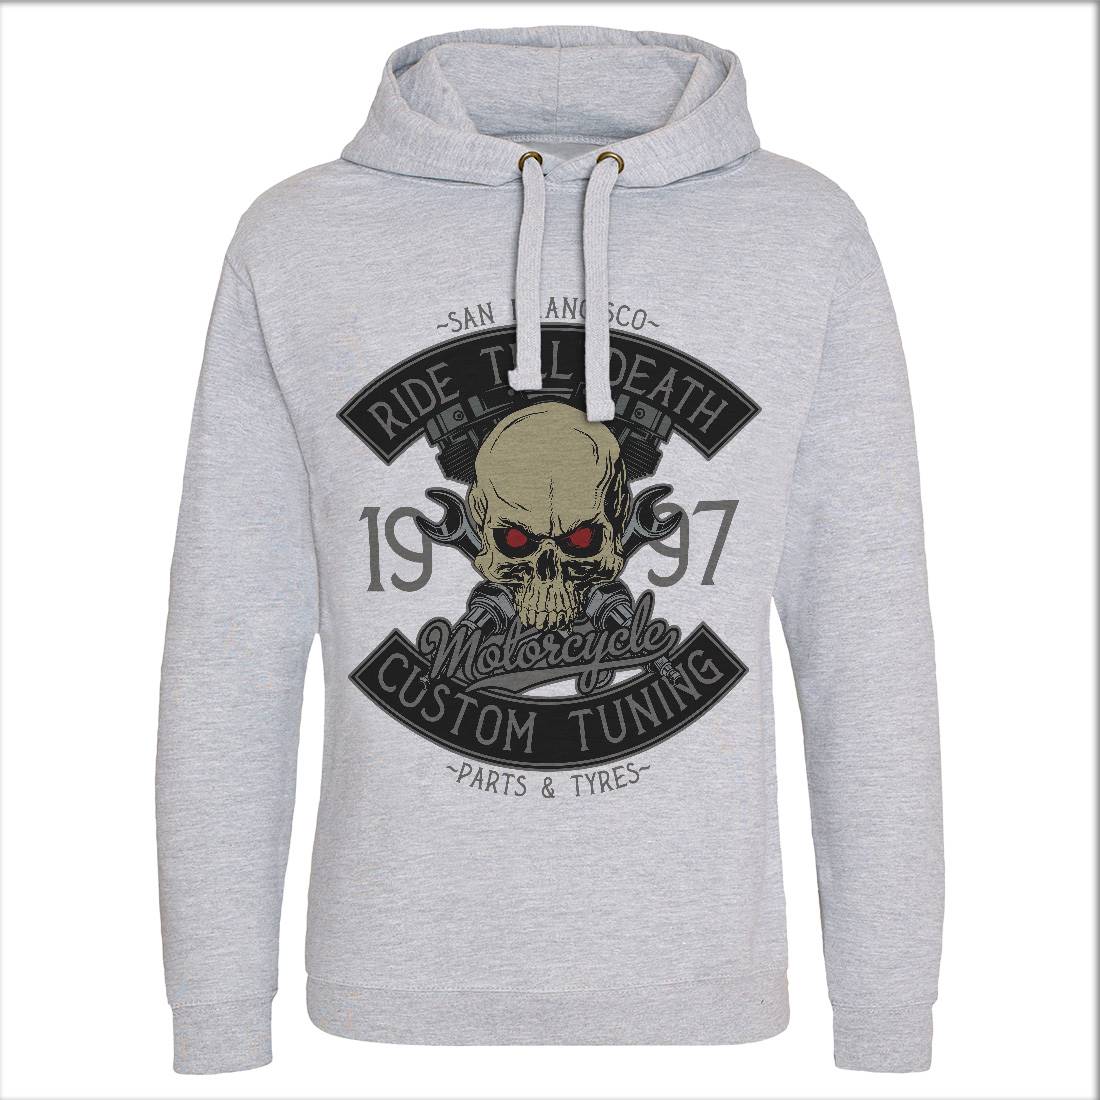 Ride Till Death Mens Hoodie Without Pocket Motorcycles D963